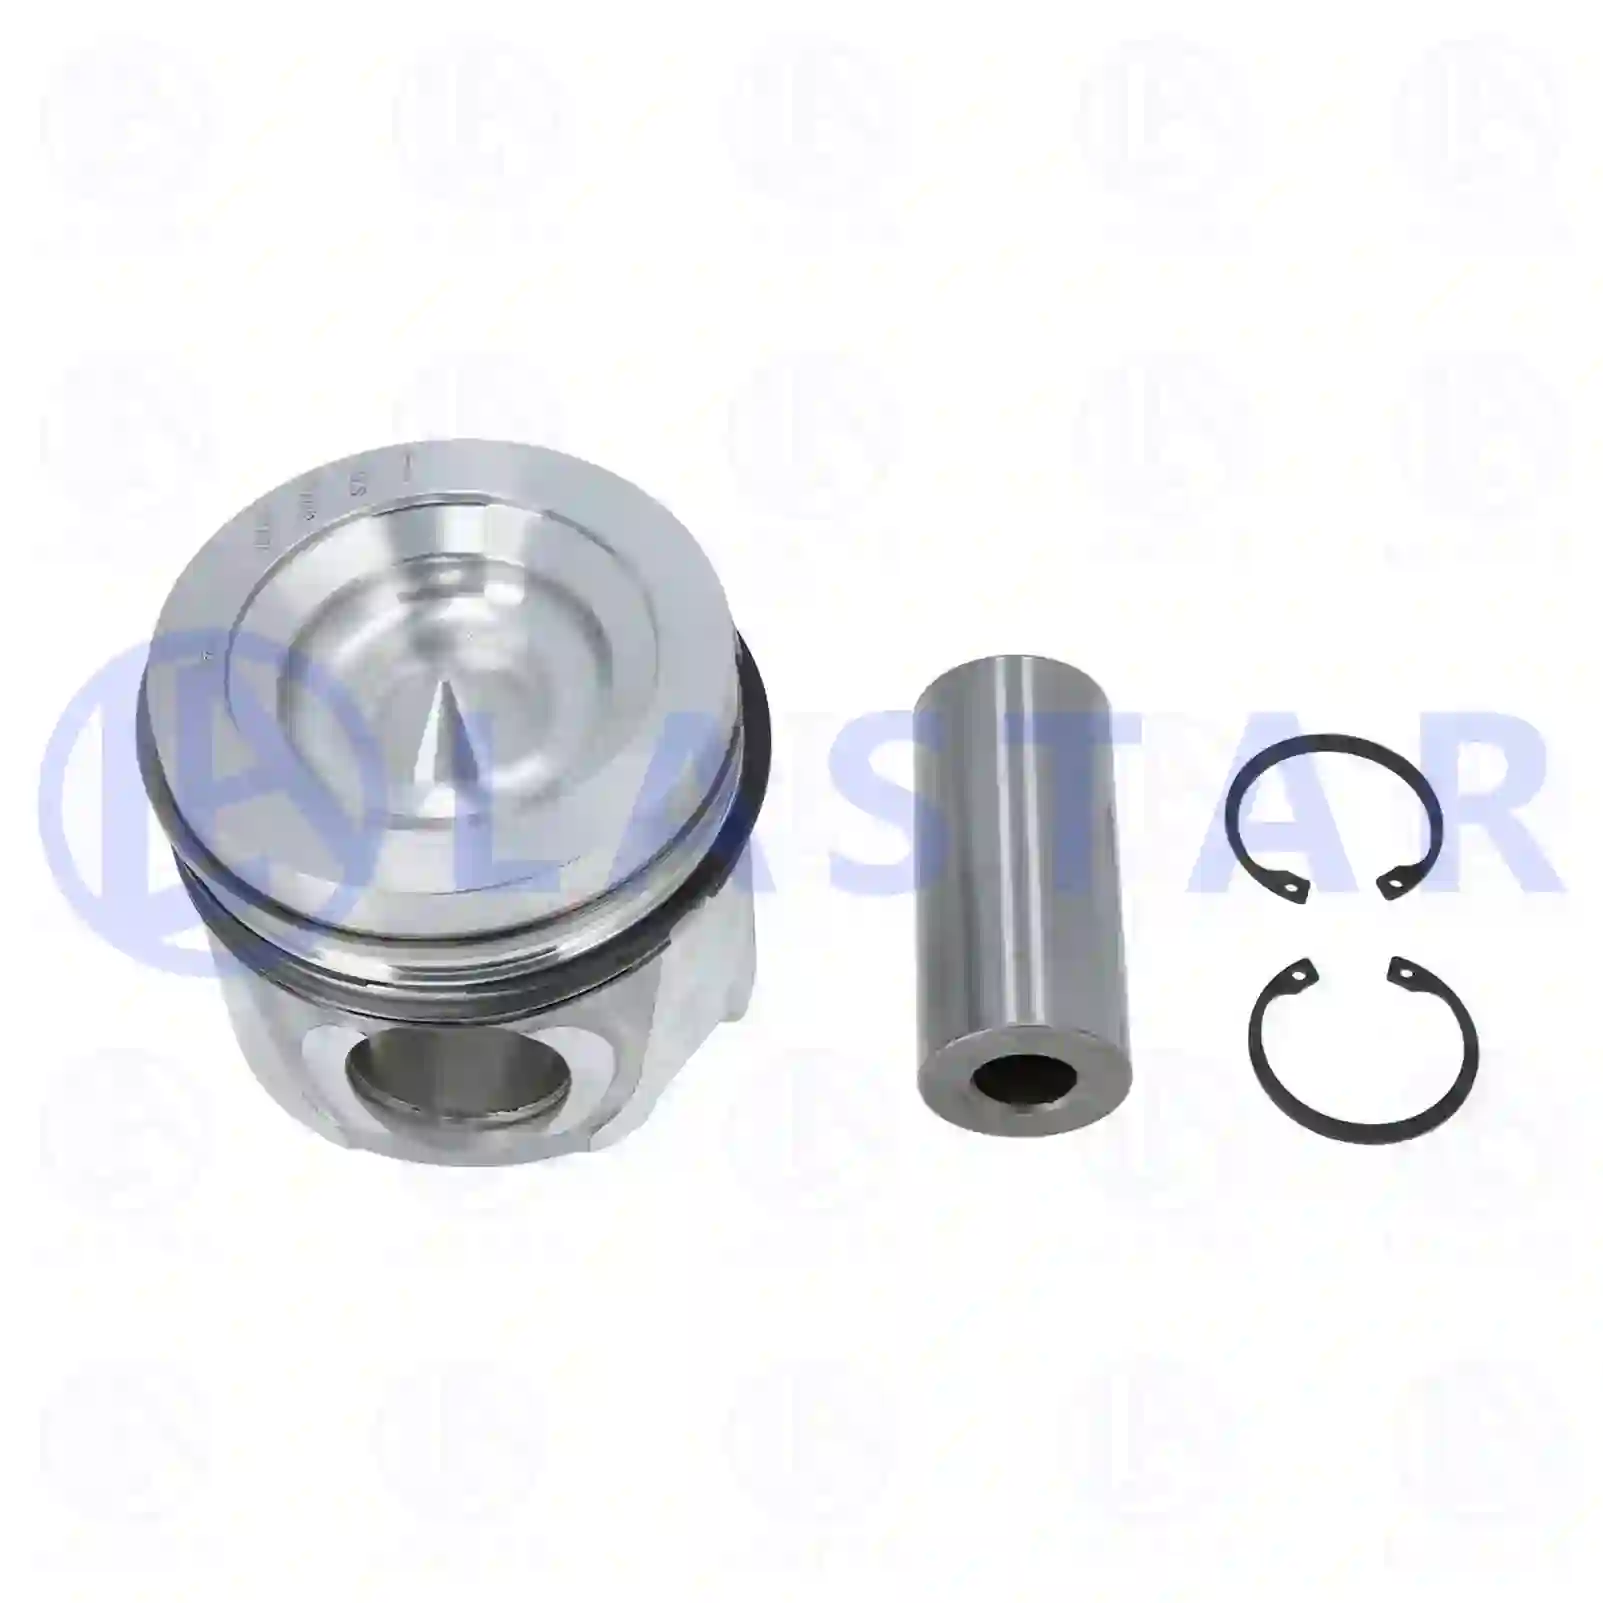 Piston, complete with rings, 77701237, 08099194, 500055920, 8099194 ||  77701237 Lastar Spare Part | Truck Spare Parts, Auotomotive Spare Parts Piston, complete with rings, 77701237, 08099194, 500055920, 8099194 ||  77701237 Lastar Spare Part | Truck Spare Parts, Auotomotive Spare Parts